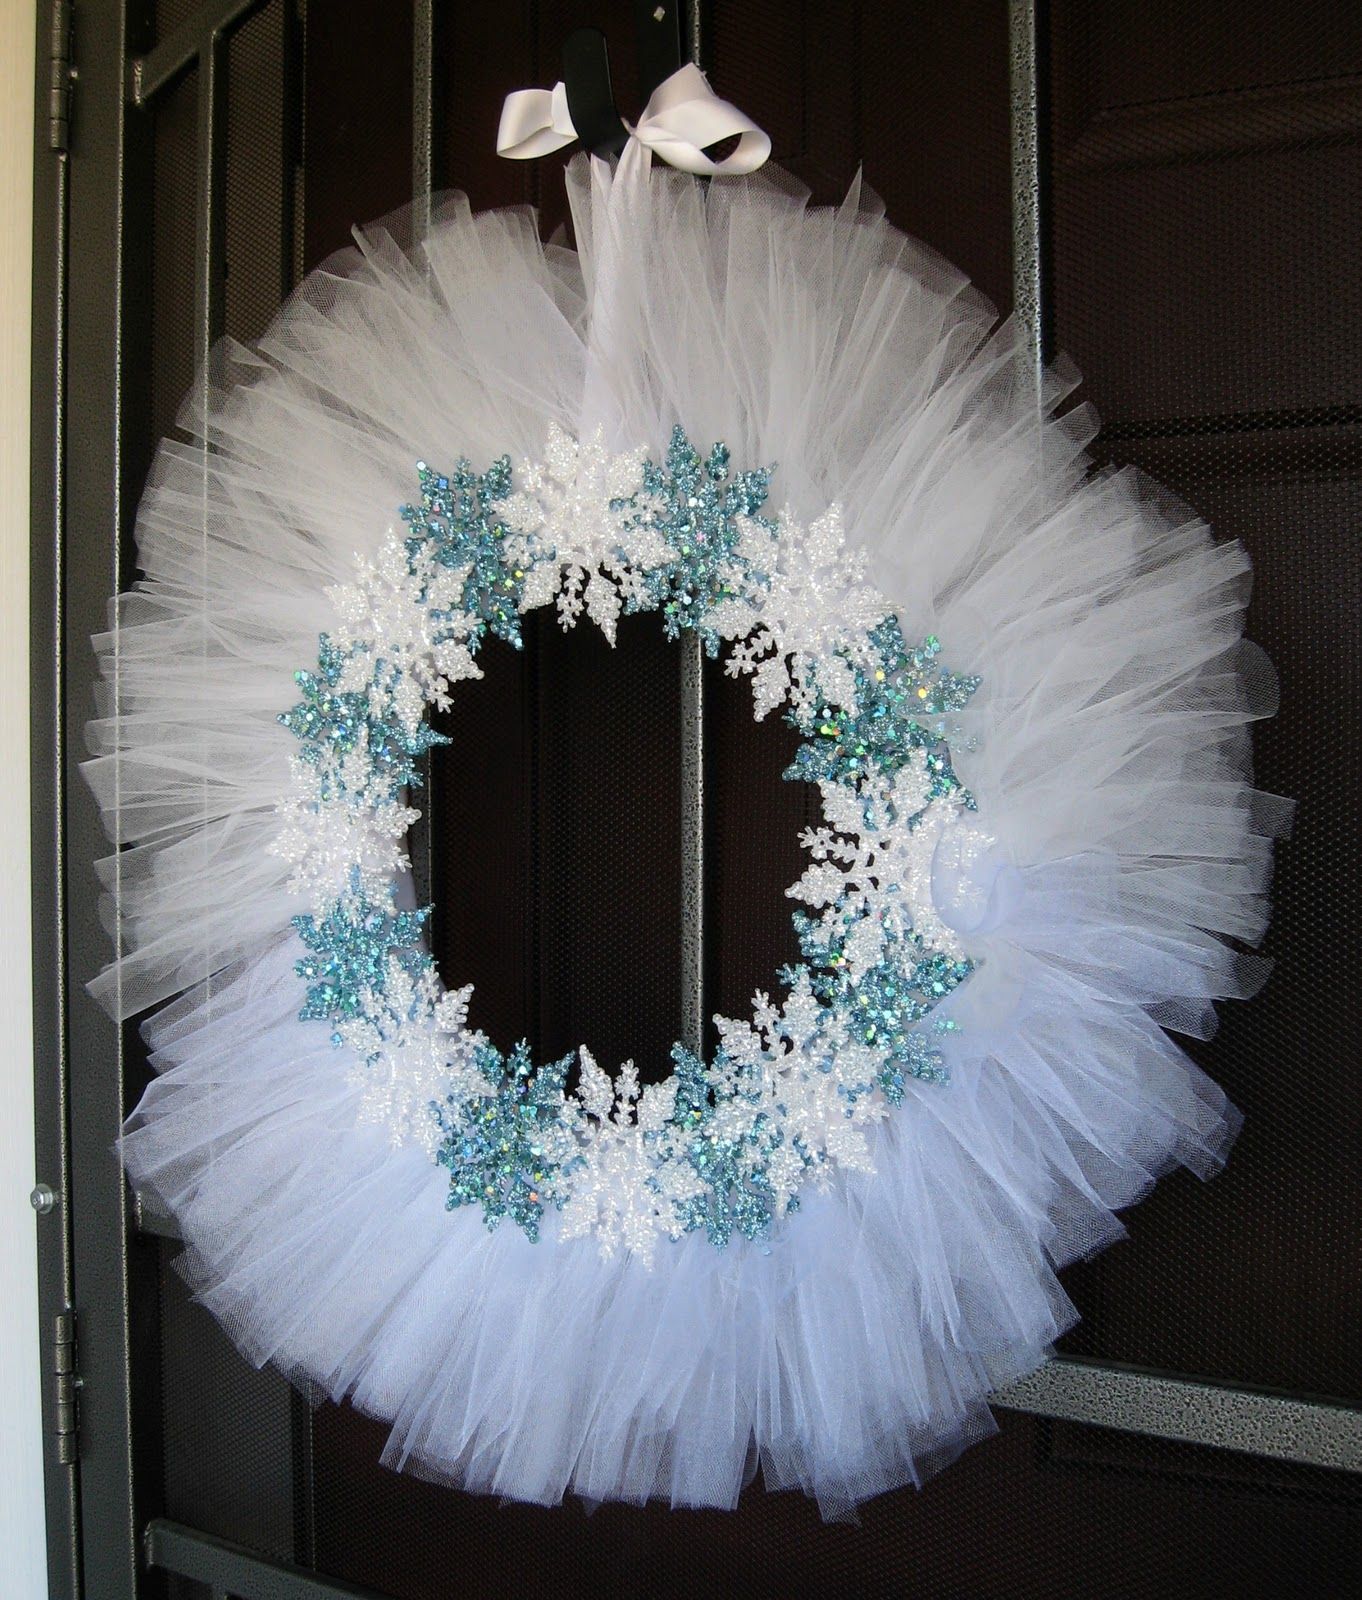 White tulle and snowflake wreath.  Love it!  I might have to do a blue tulle onl